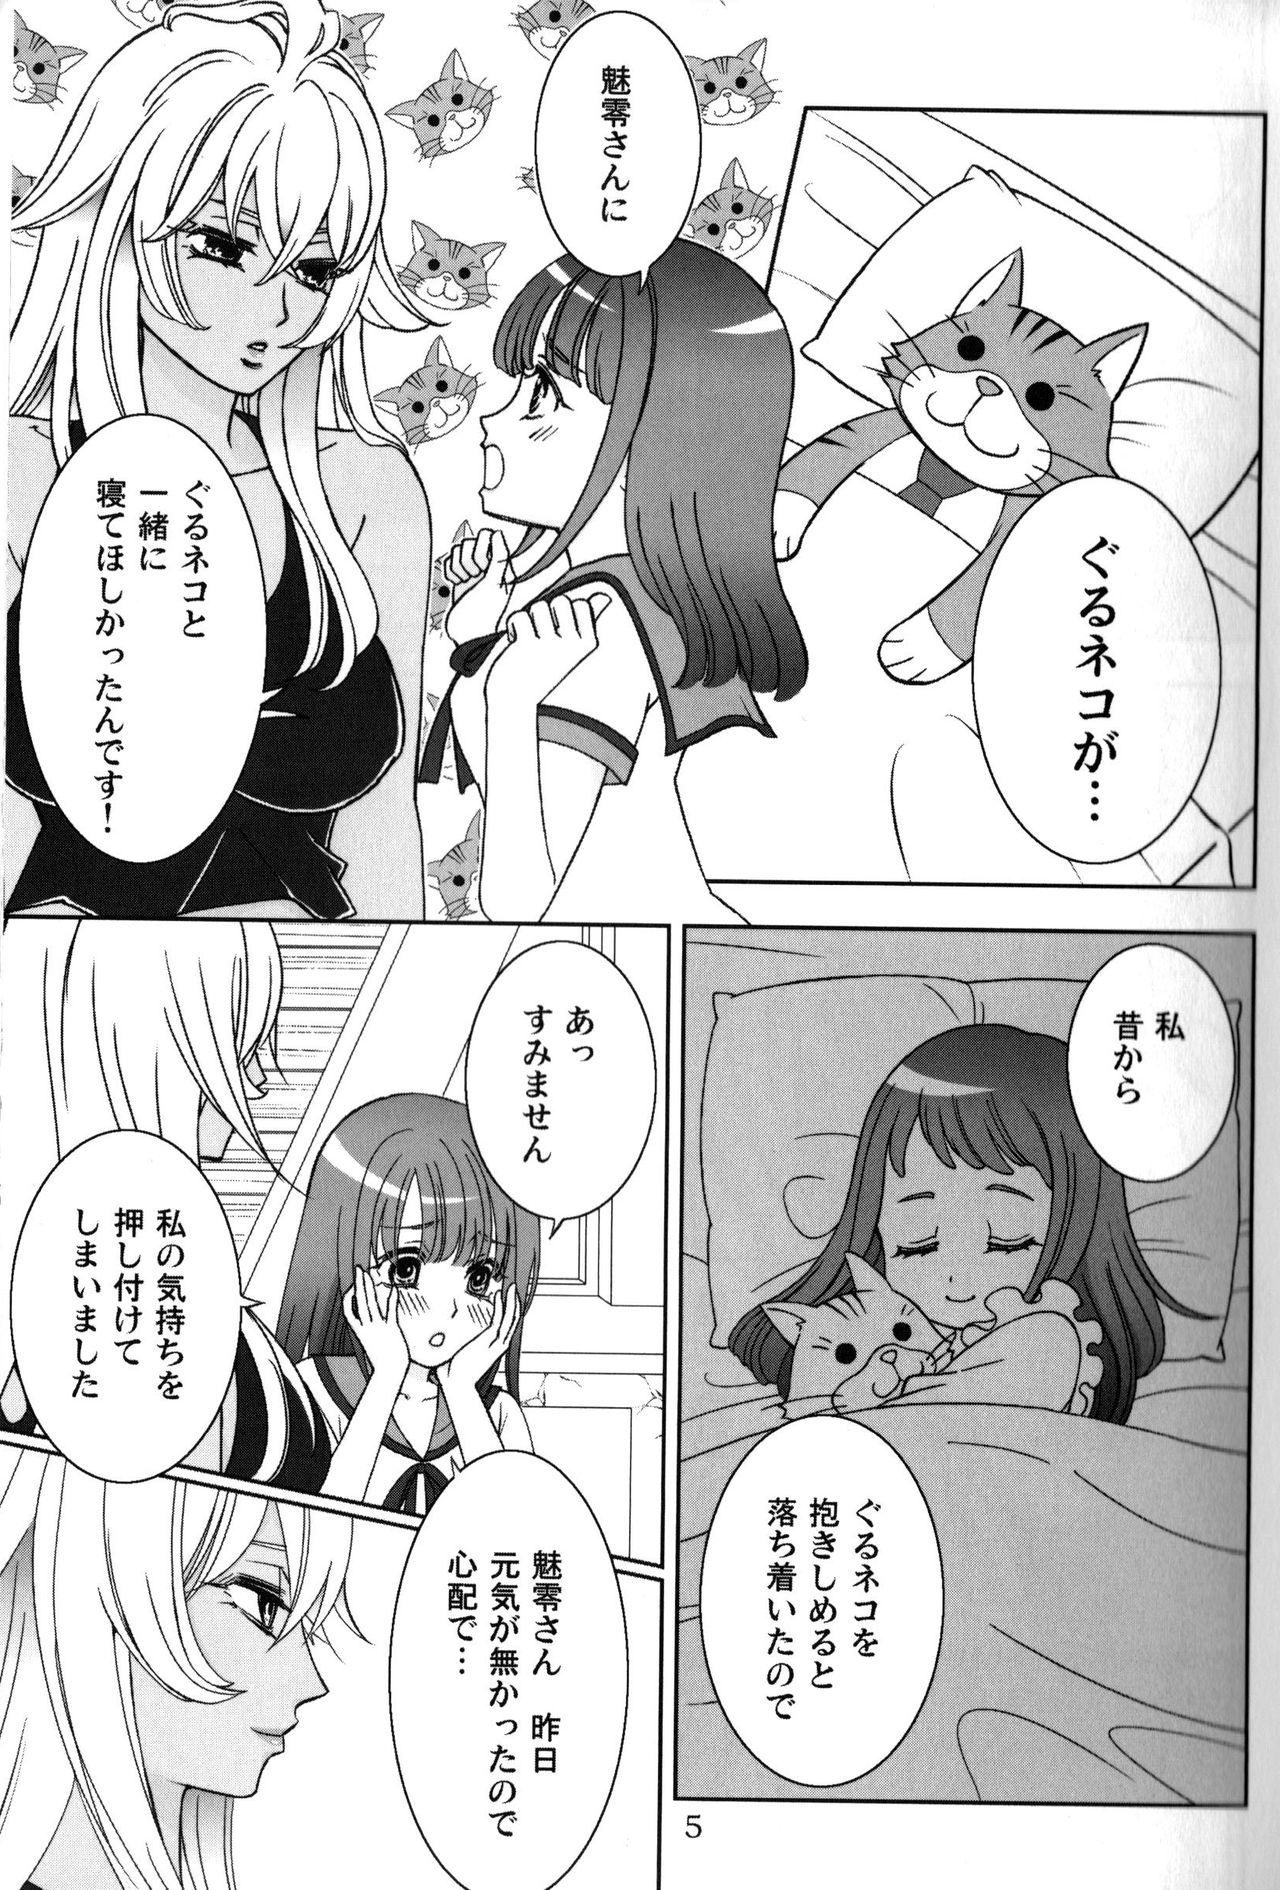 Insertion Give it Away - Valkyrie drive Hidden Camera - Page 4